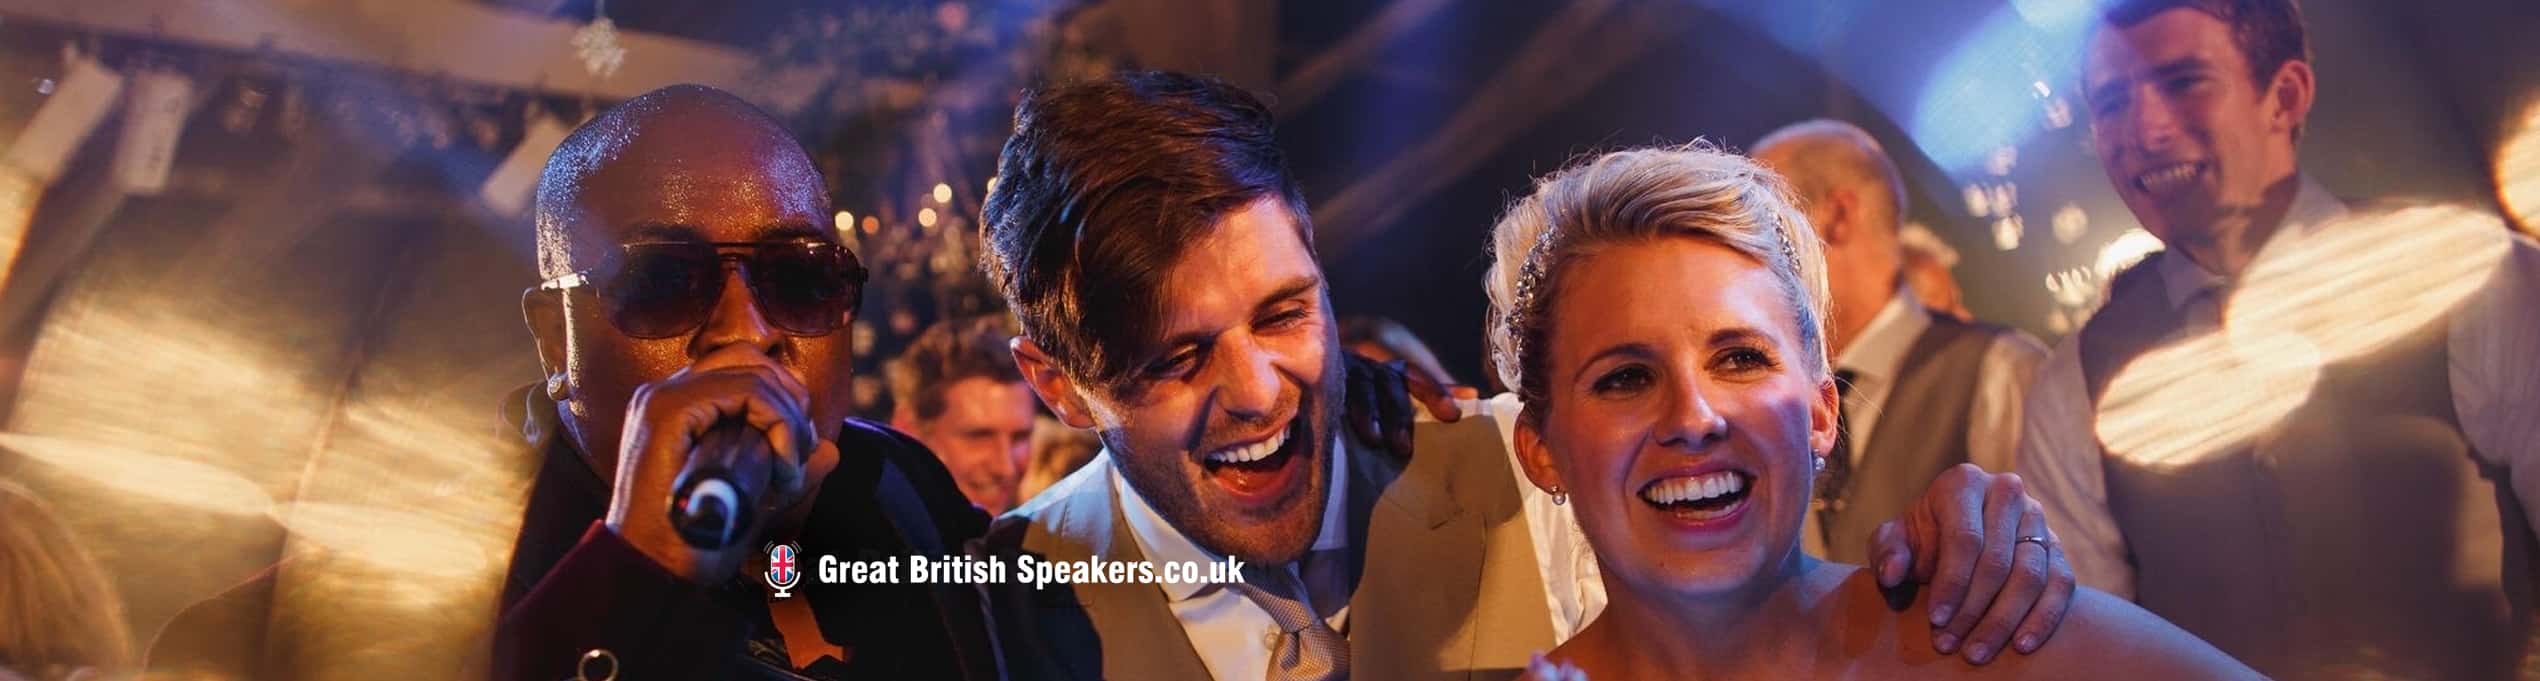 Kevin Izzard Fire and Ice corproate wedding events Band at Great British Speakers